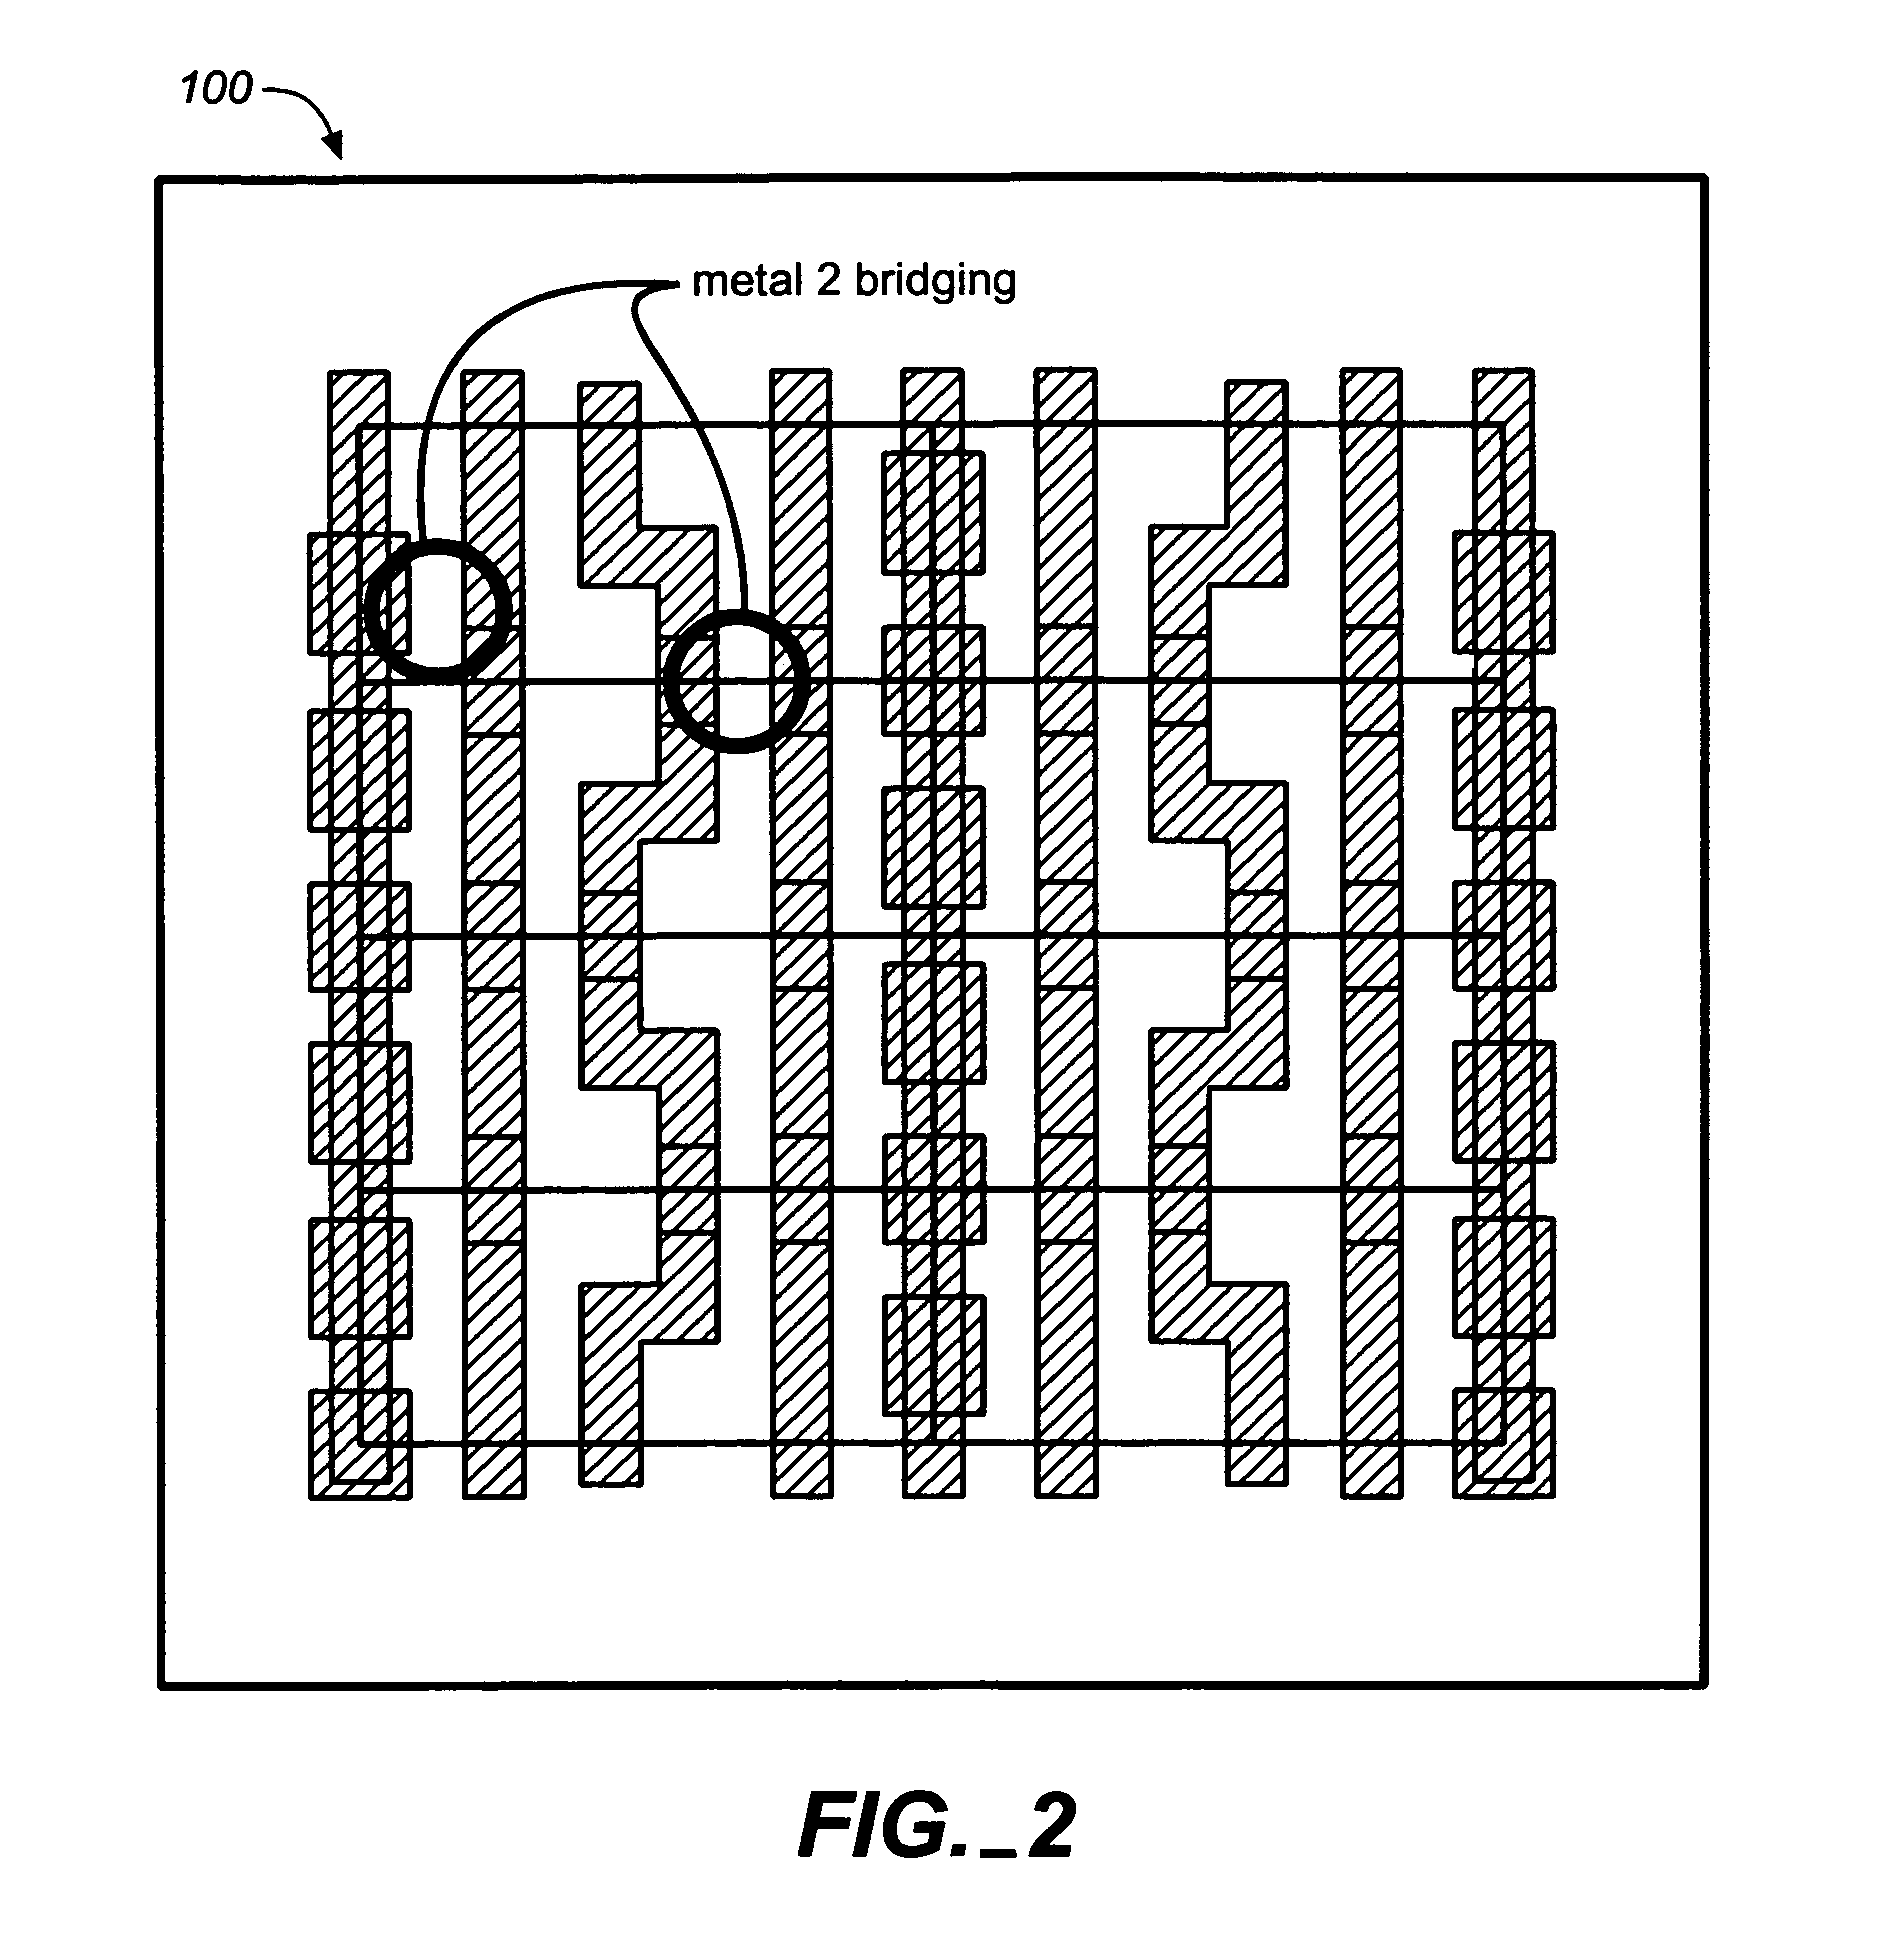 Test structures in unused areas of semiconductor integrated circuits and methods for designing the same